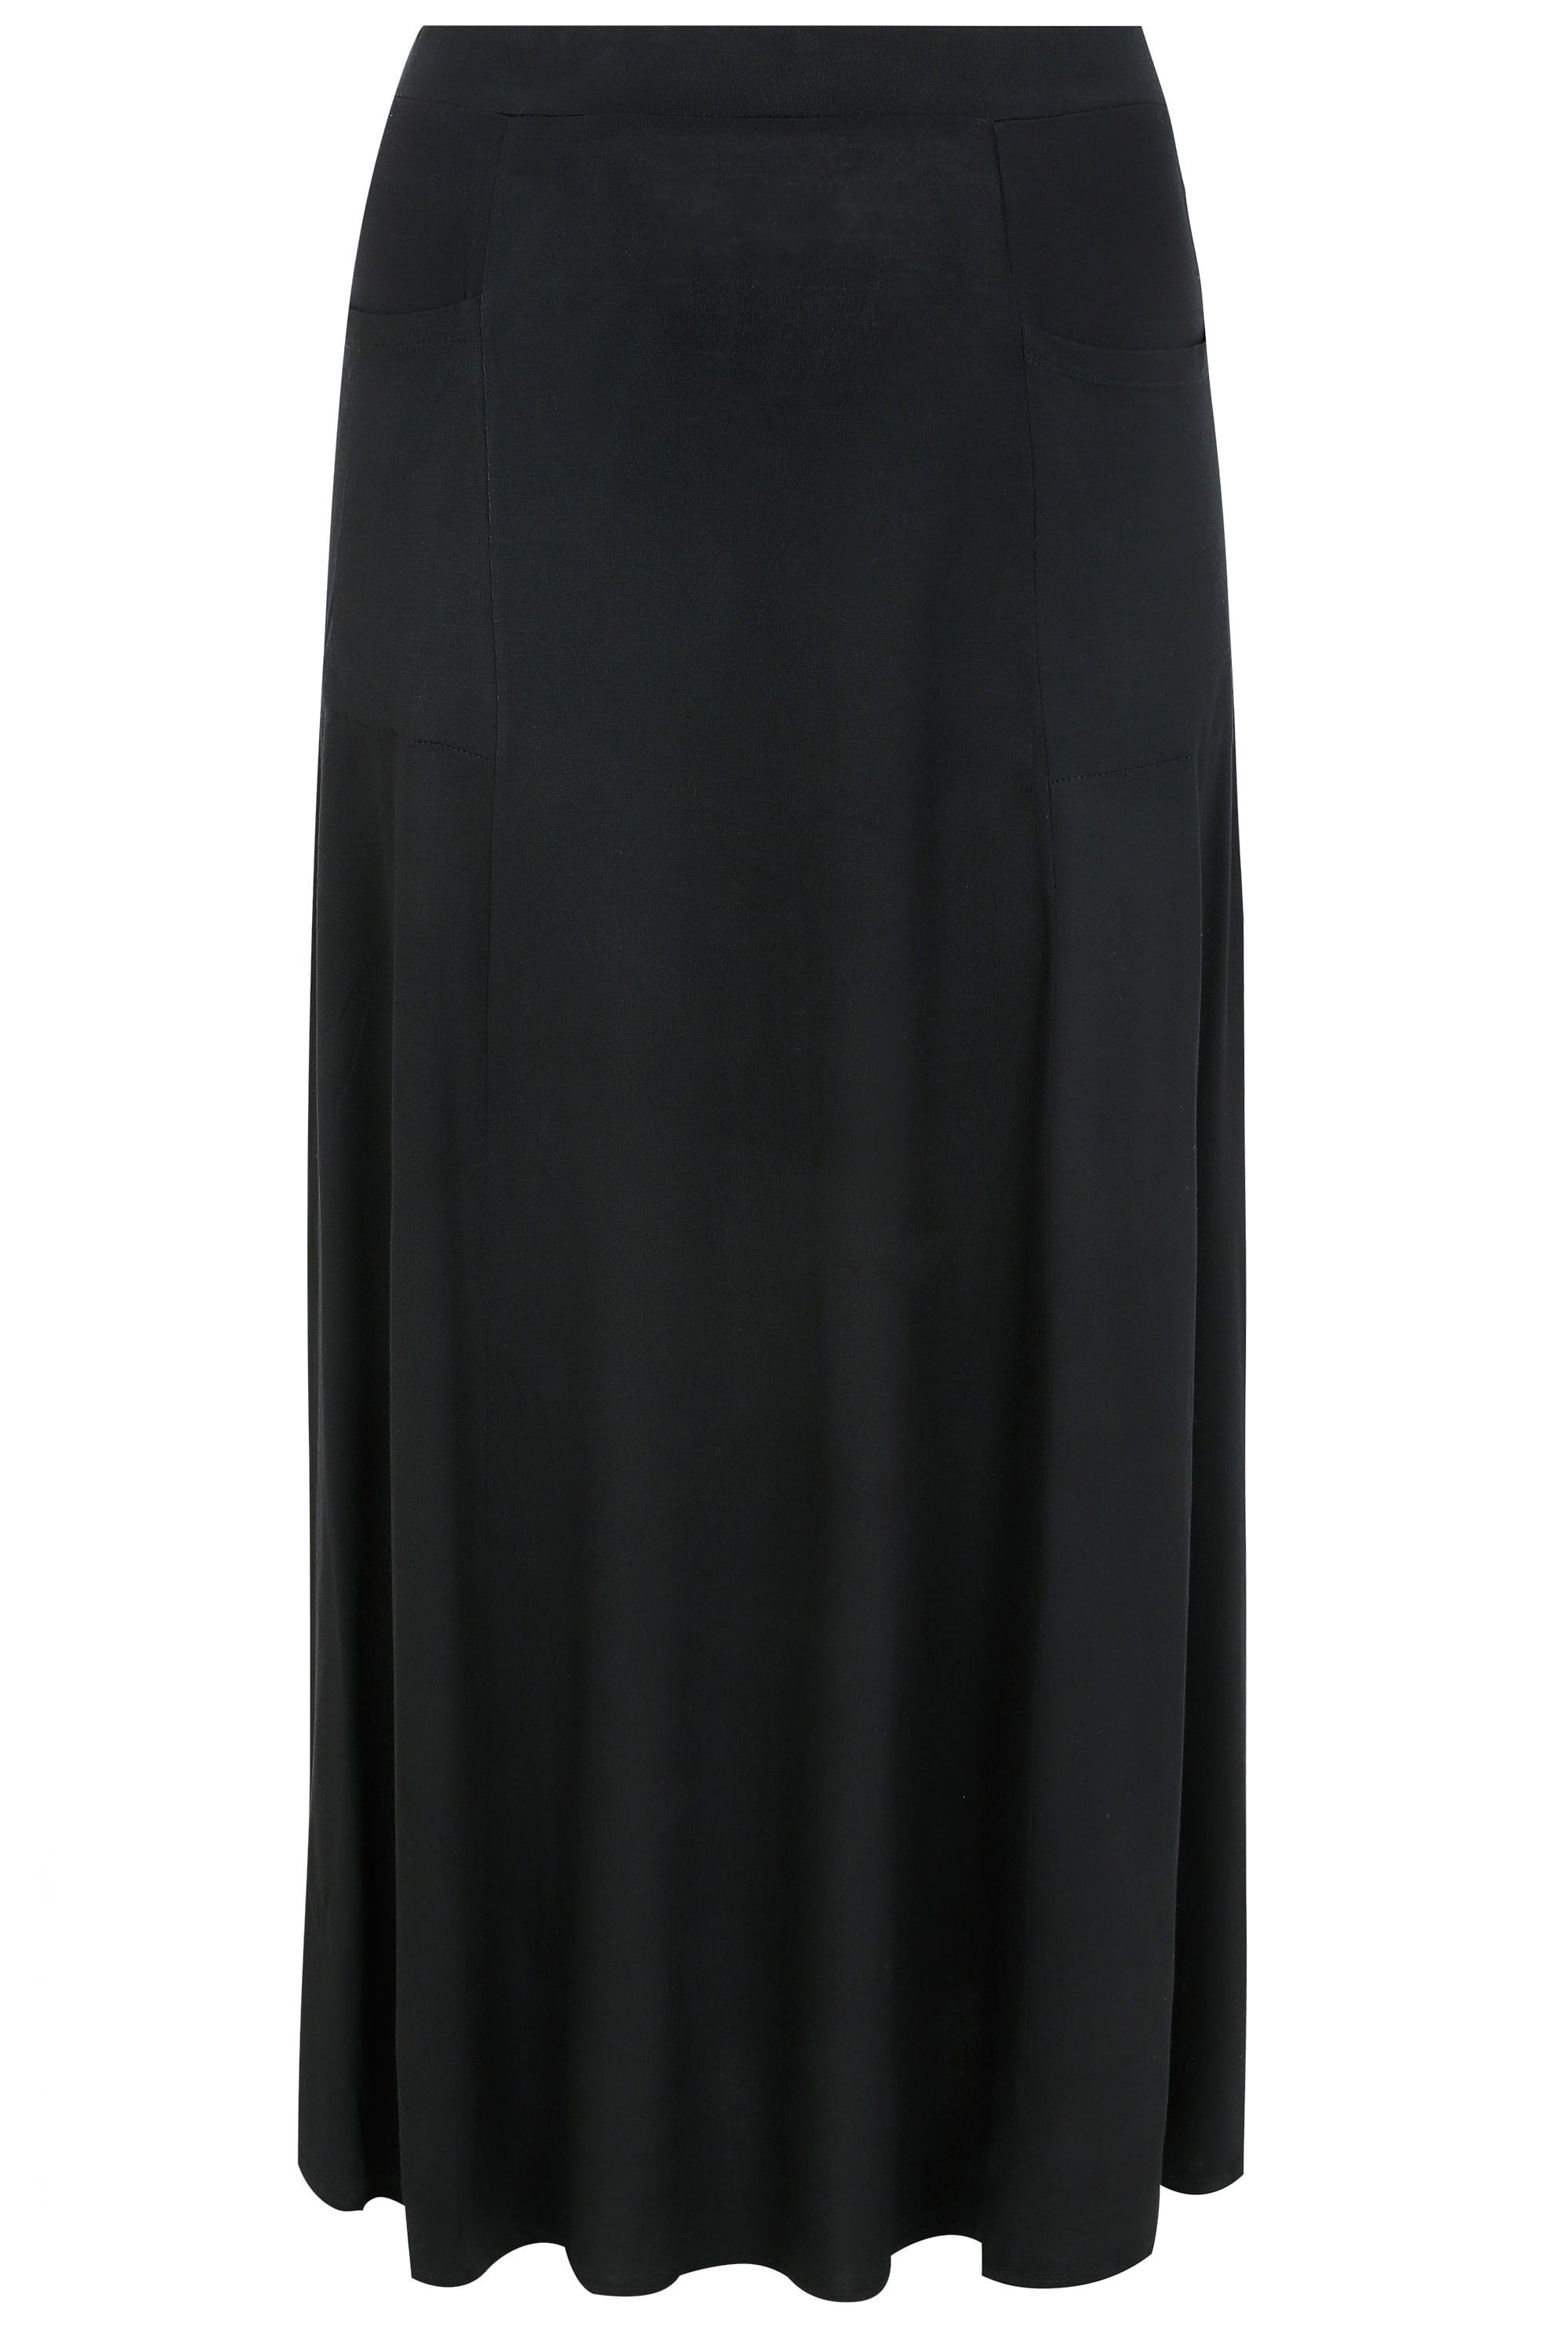 Black Maxi Skirt With Pockets, Plus size 16 to 36